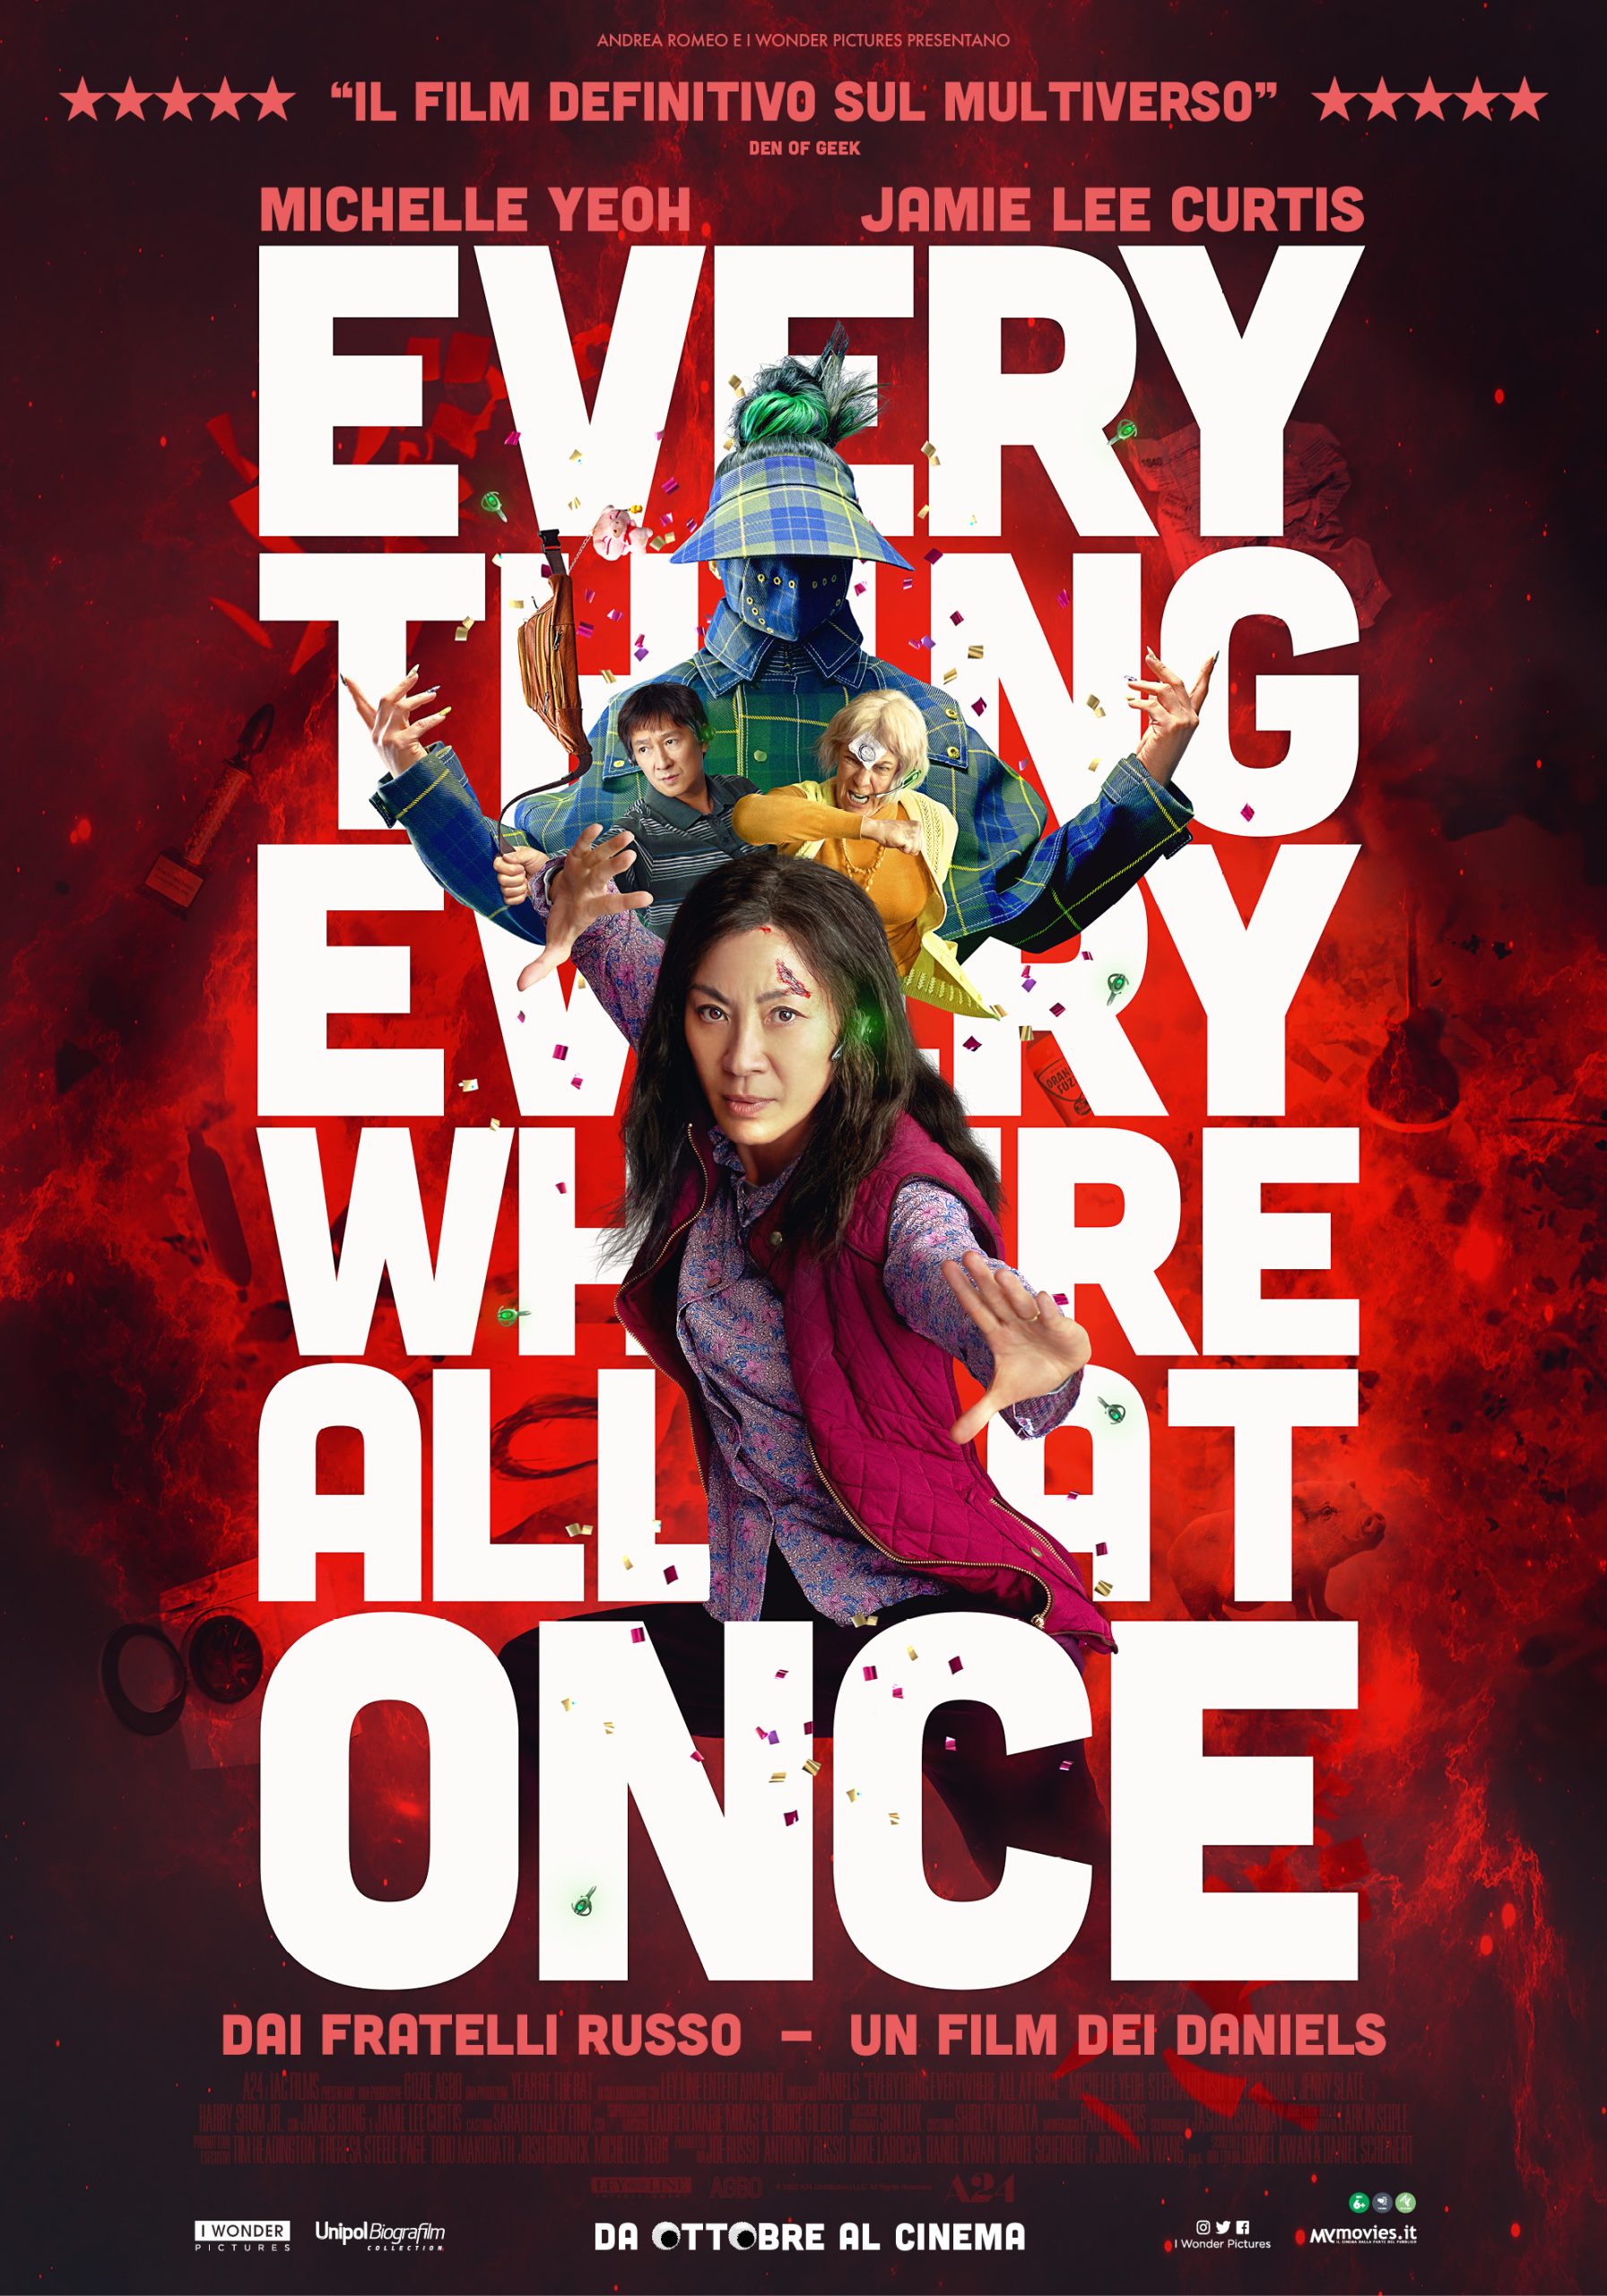 [NEWS] Il trailer italiano del fantasy Everything Everywhere All at Once